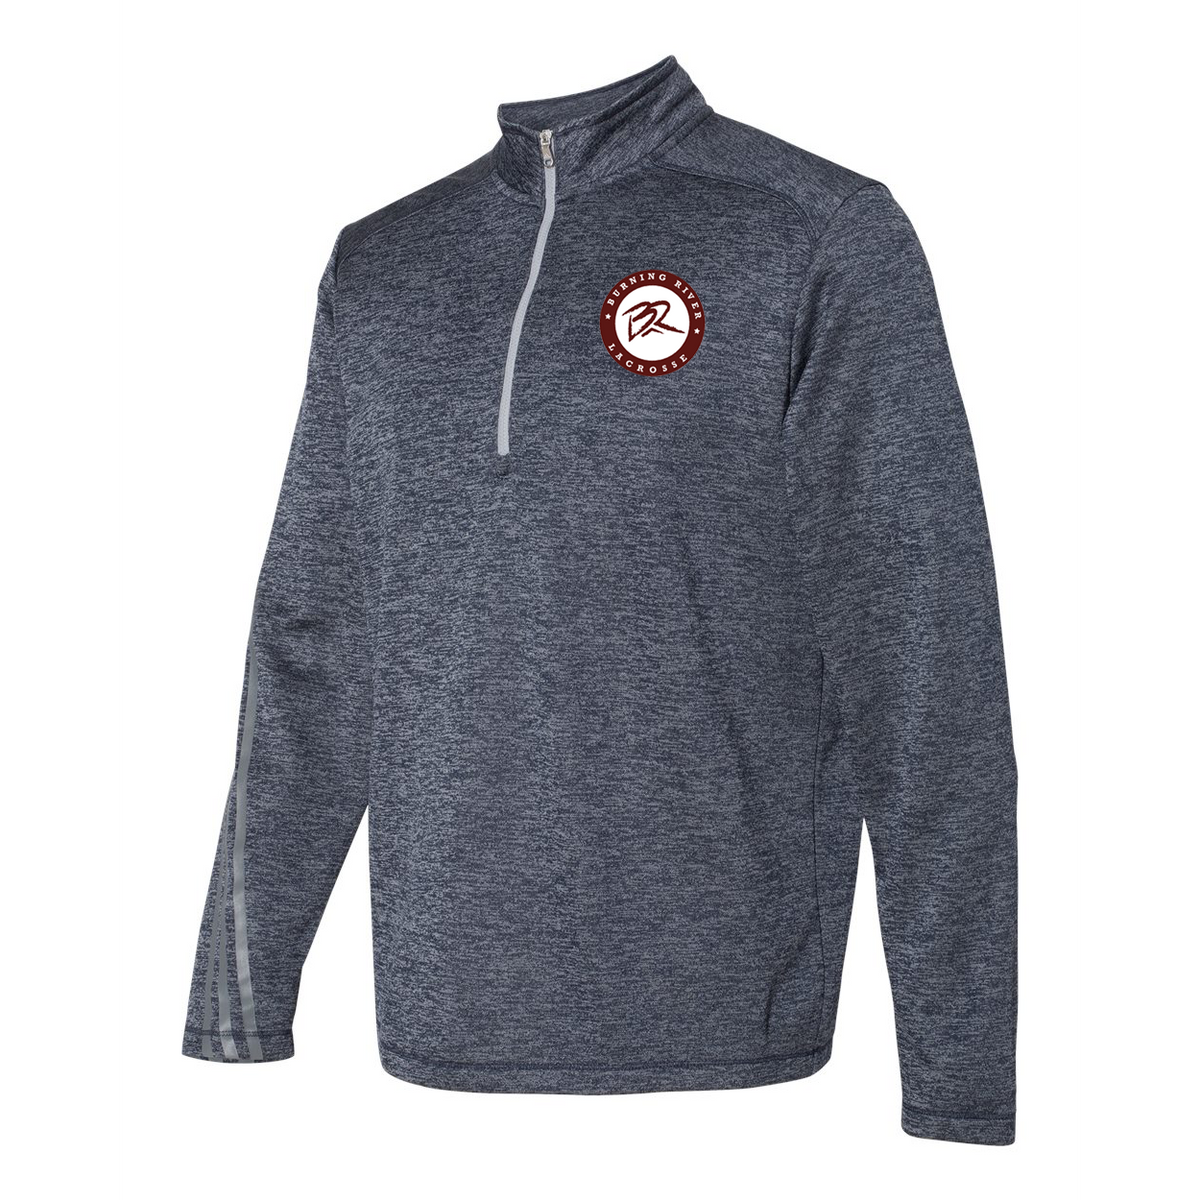 Burning River Lacrosse Adidas Terry Heathered Quarter-Zip Pullover